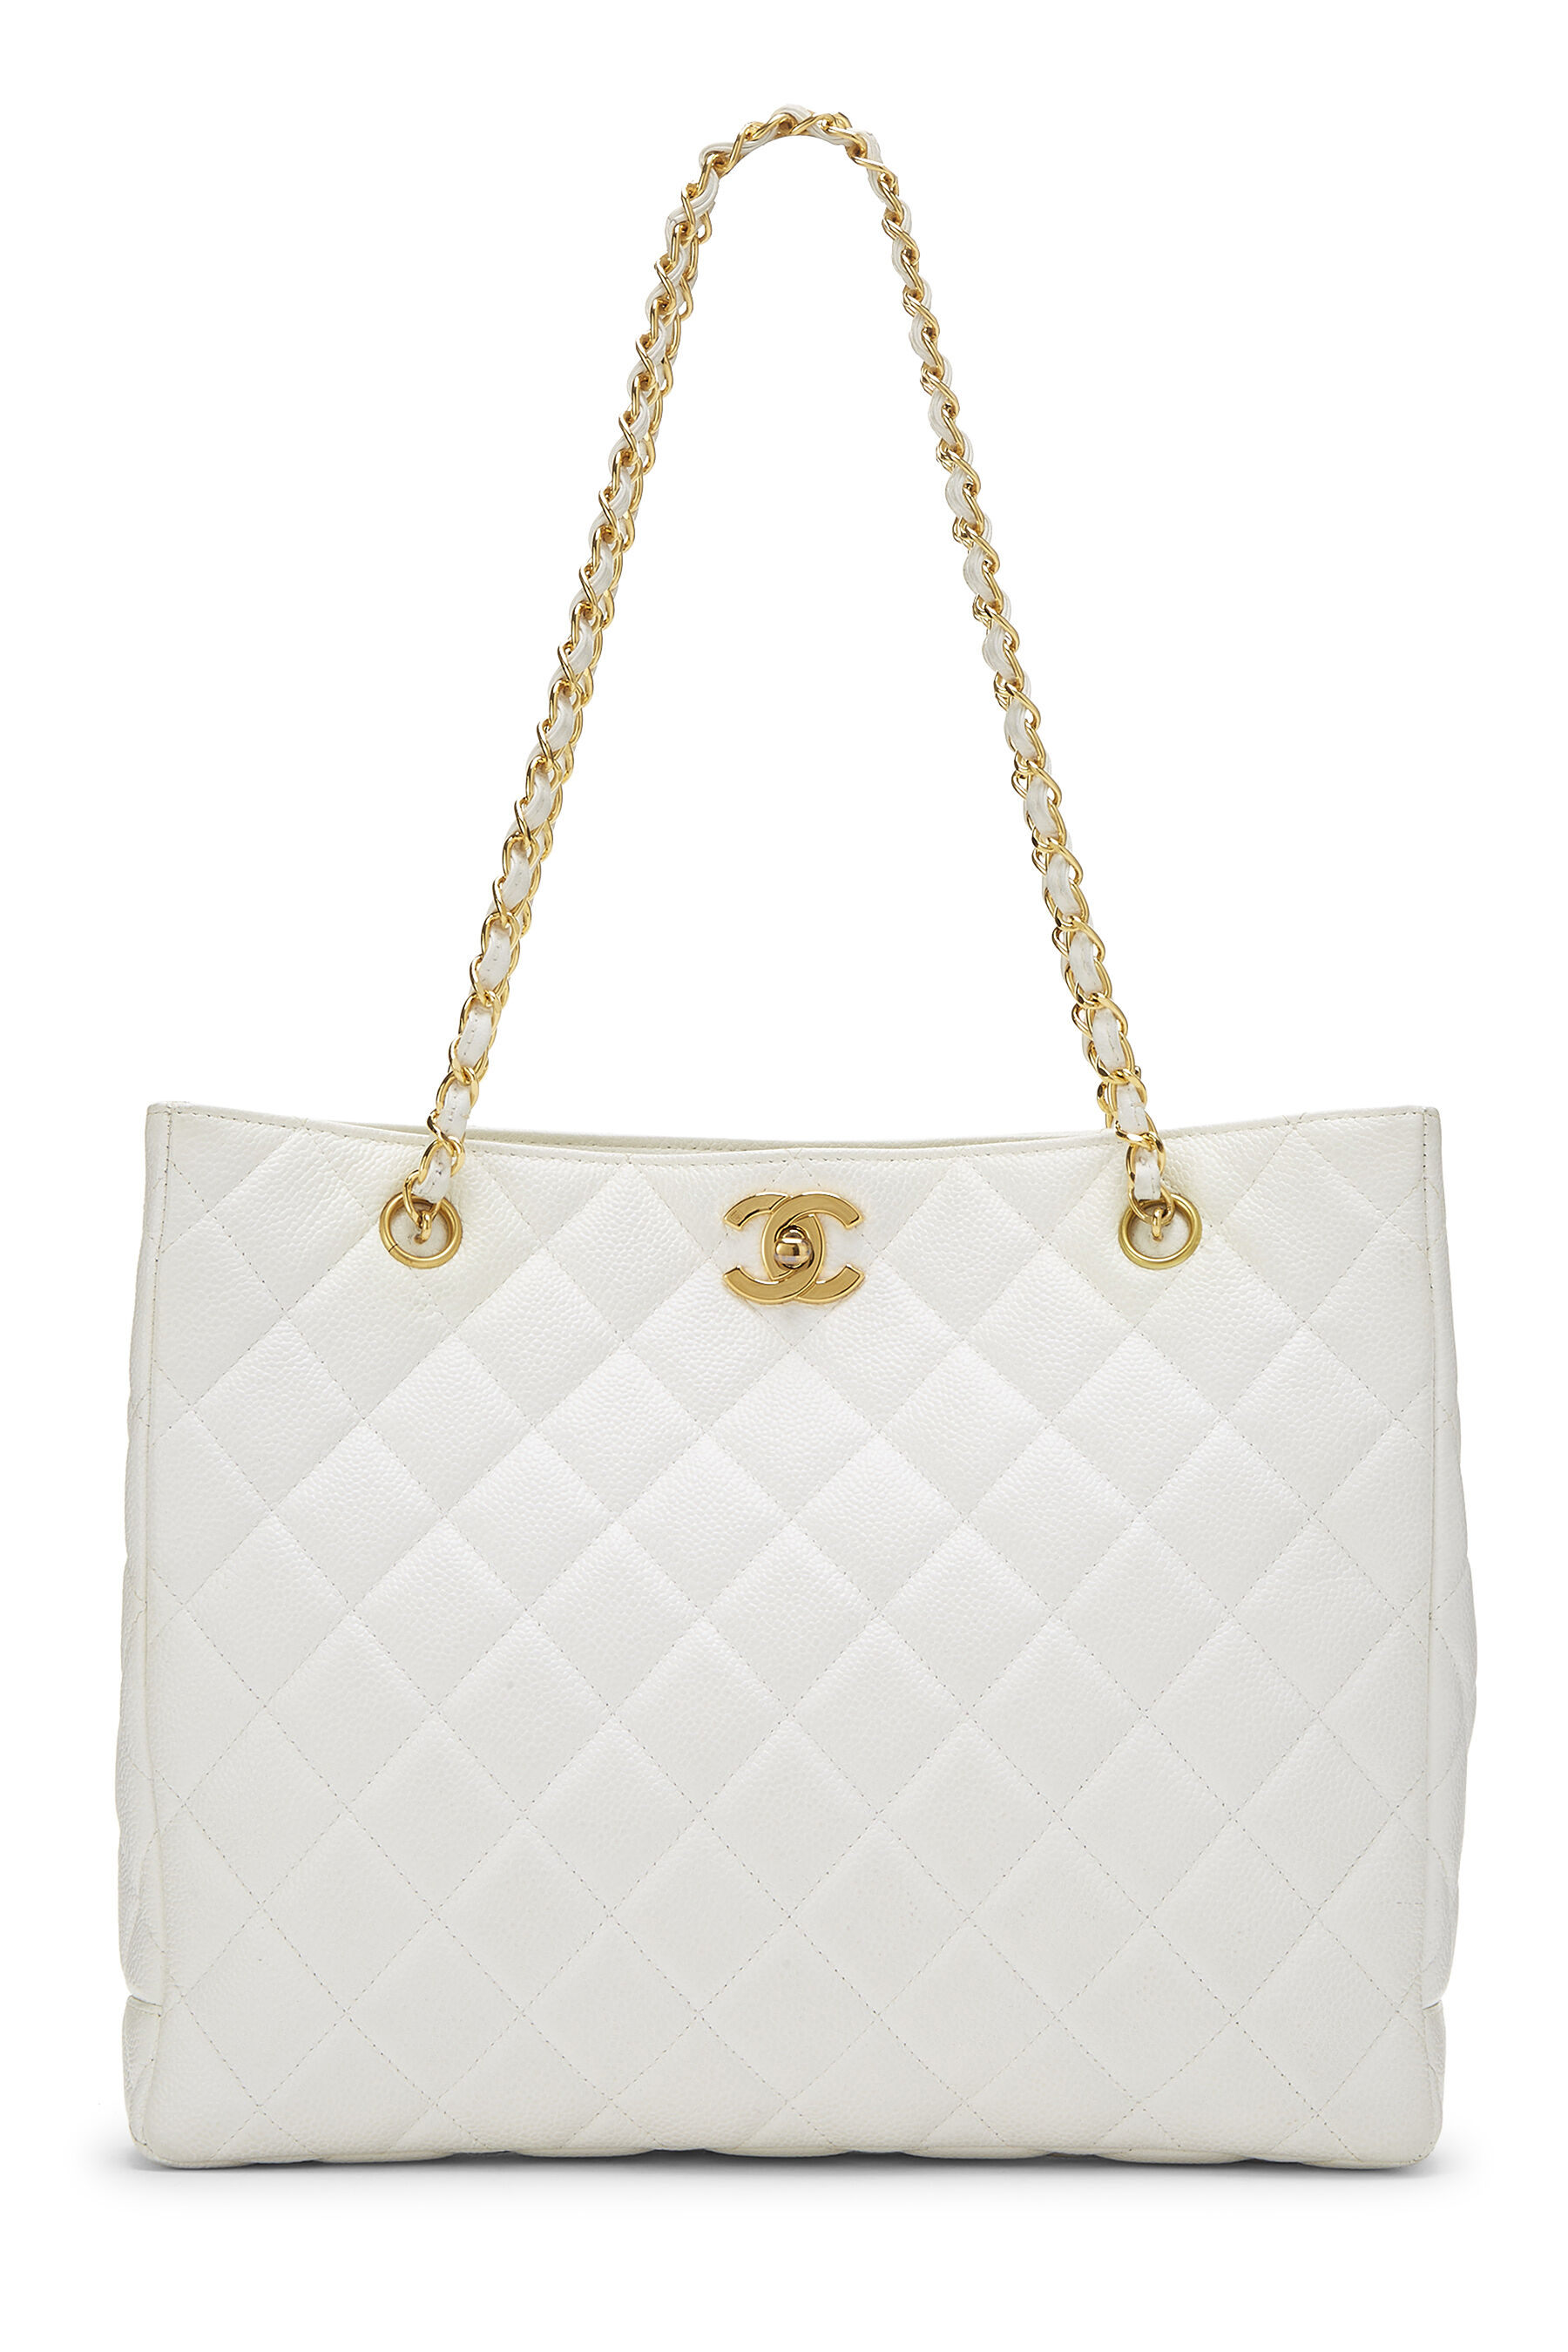 Chanel - White Quilted Caviar Tote